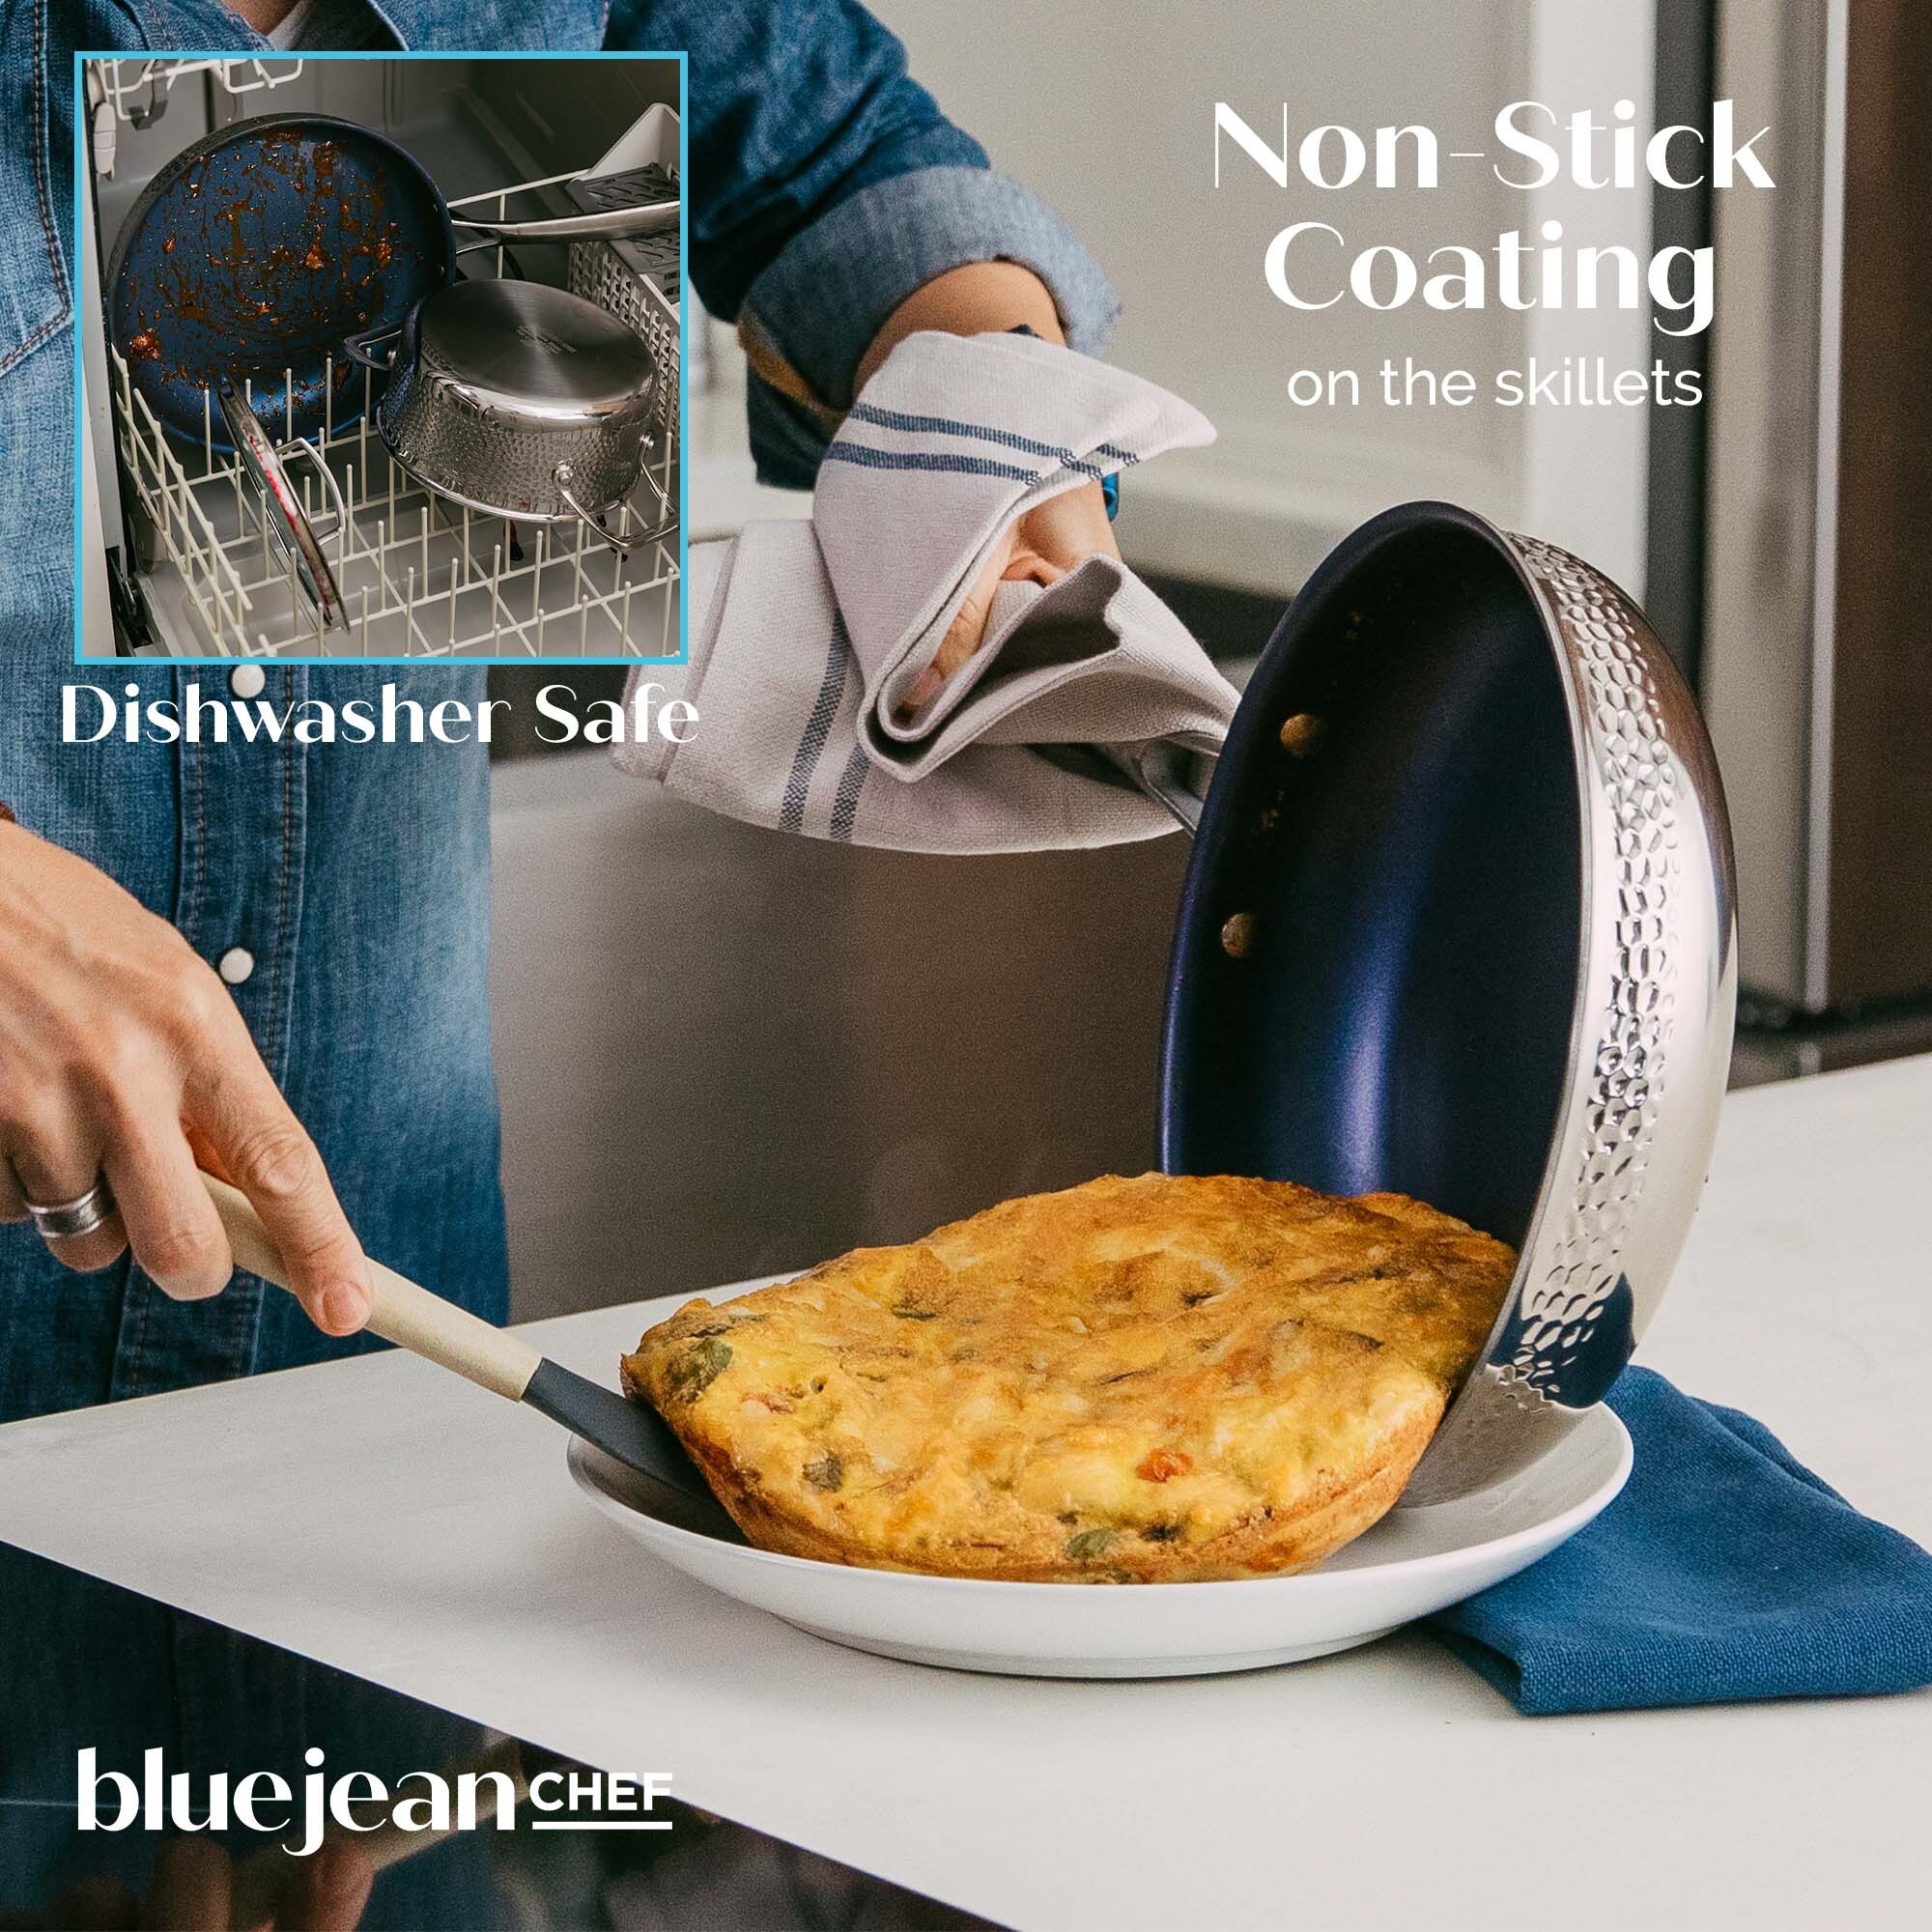 https://ak1.ostkcdn.com/images/products/is/images/direct/3adcc6c0165a4b4663c24c03249eb3afb5511dc0/Blue-Jean-Chef-9-Piece-Stainless-Steel-Cookware-Set%2C-Hammered-Finish%2C-Tri-Ply-Construction-Clad-Cookware%2C-Nonstick.jpg